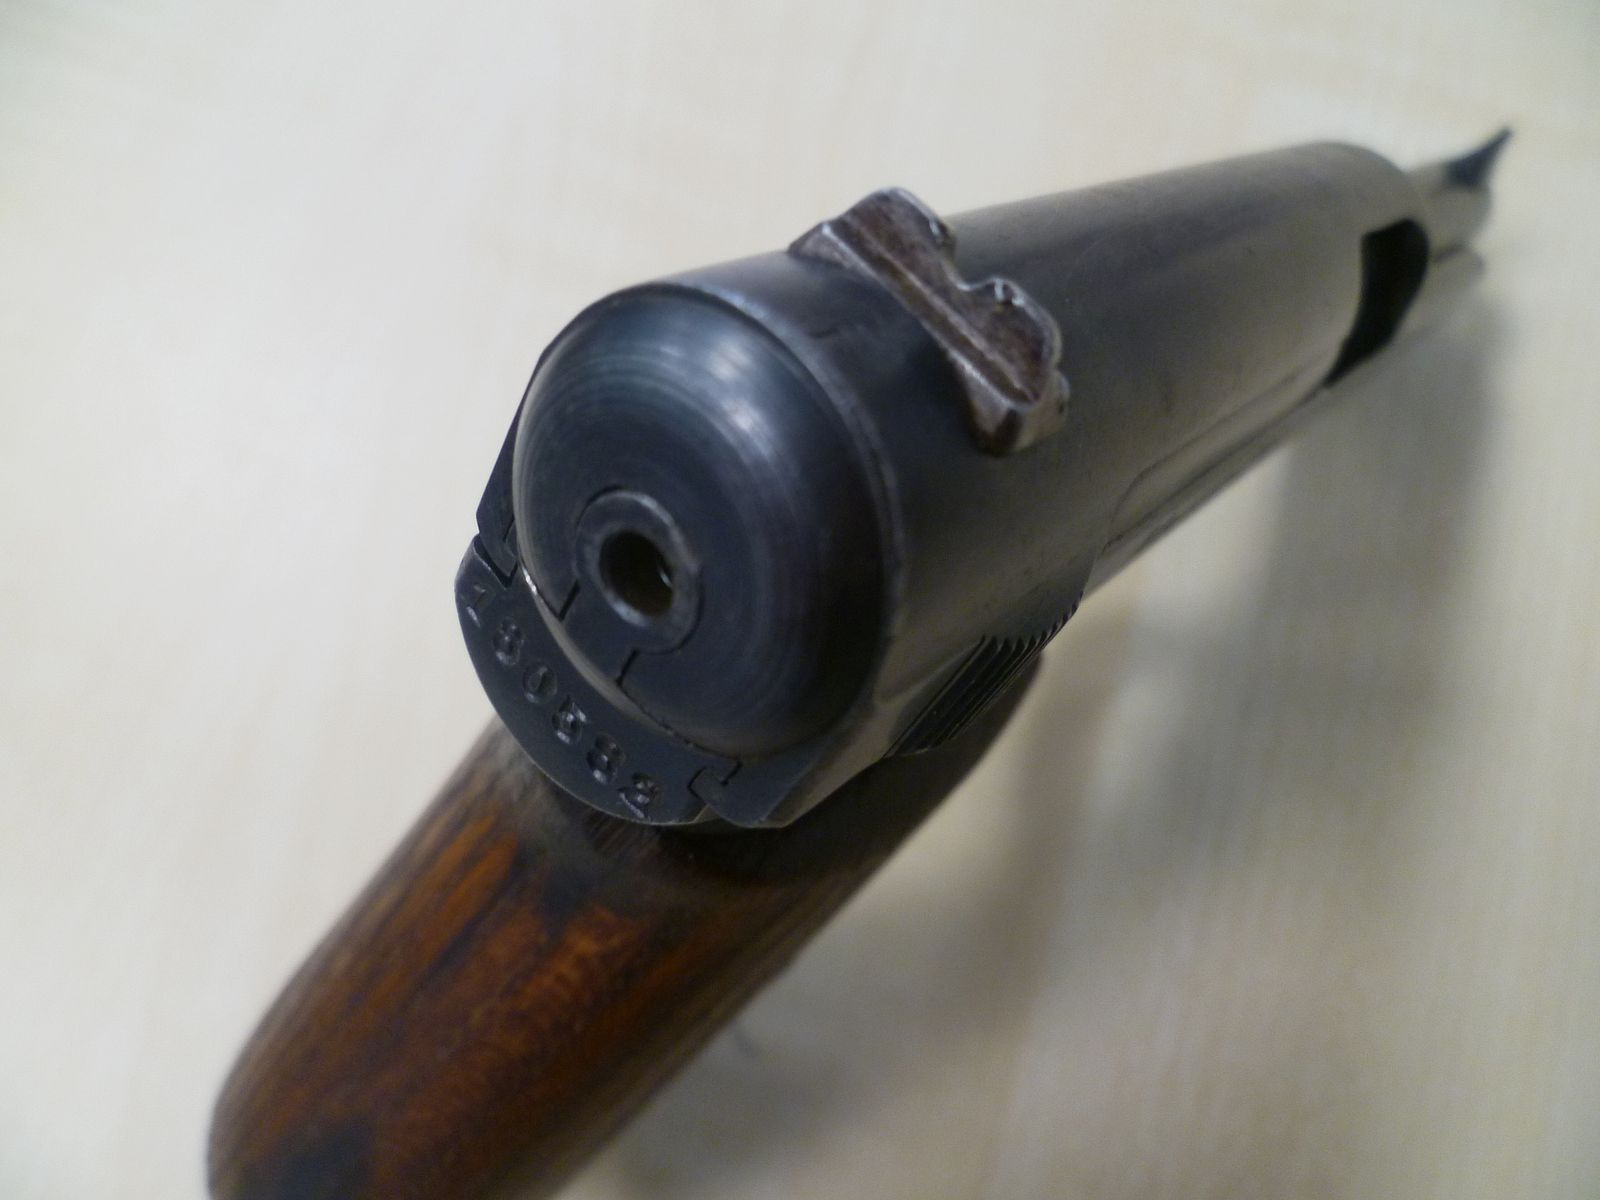 Pistole  Mauser M 1914 7,65 mm Browning